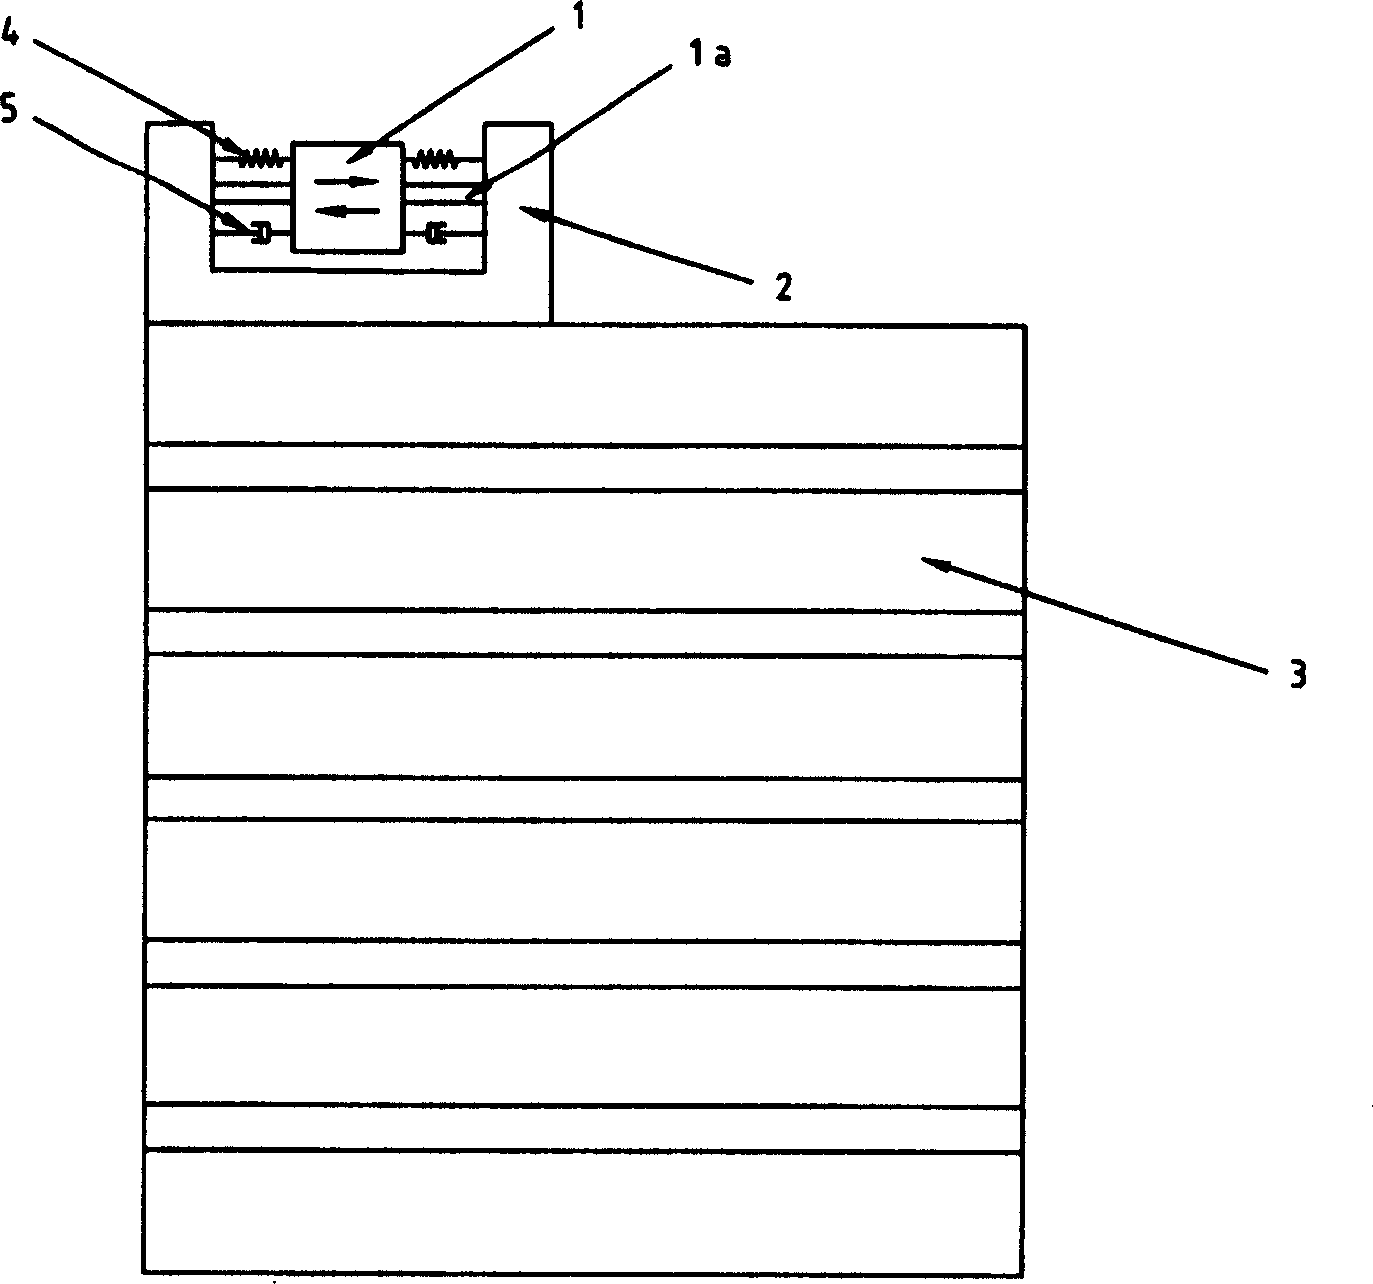 Magnetorheological fluid damp type dynamic vibration absorber and method of mounting thereof